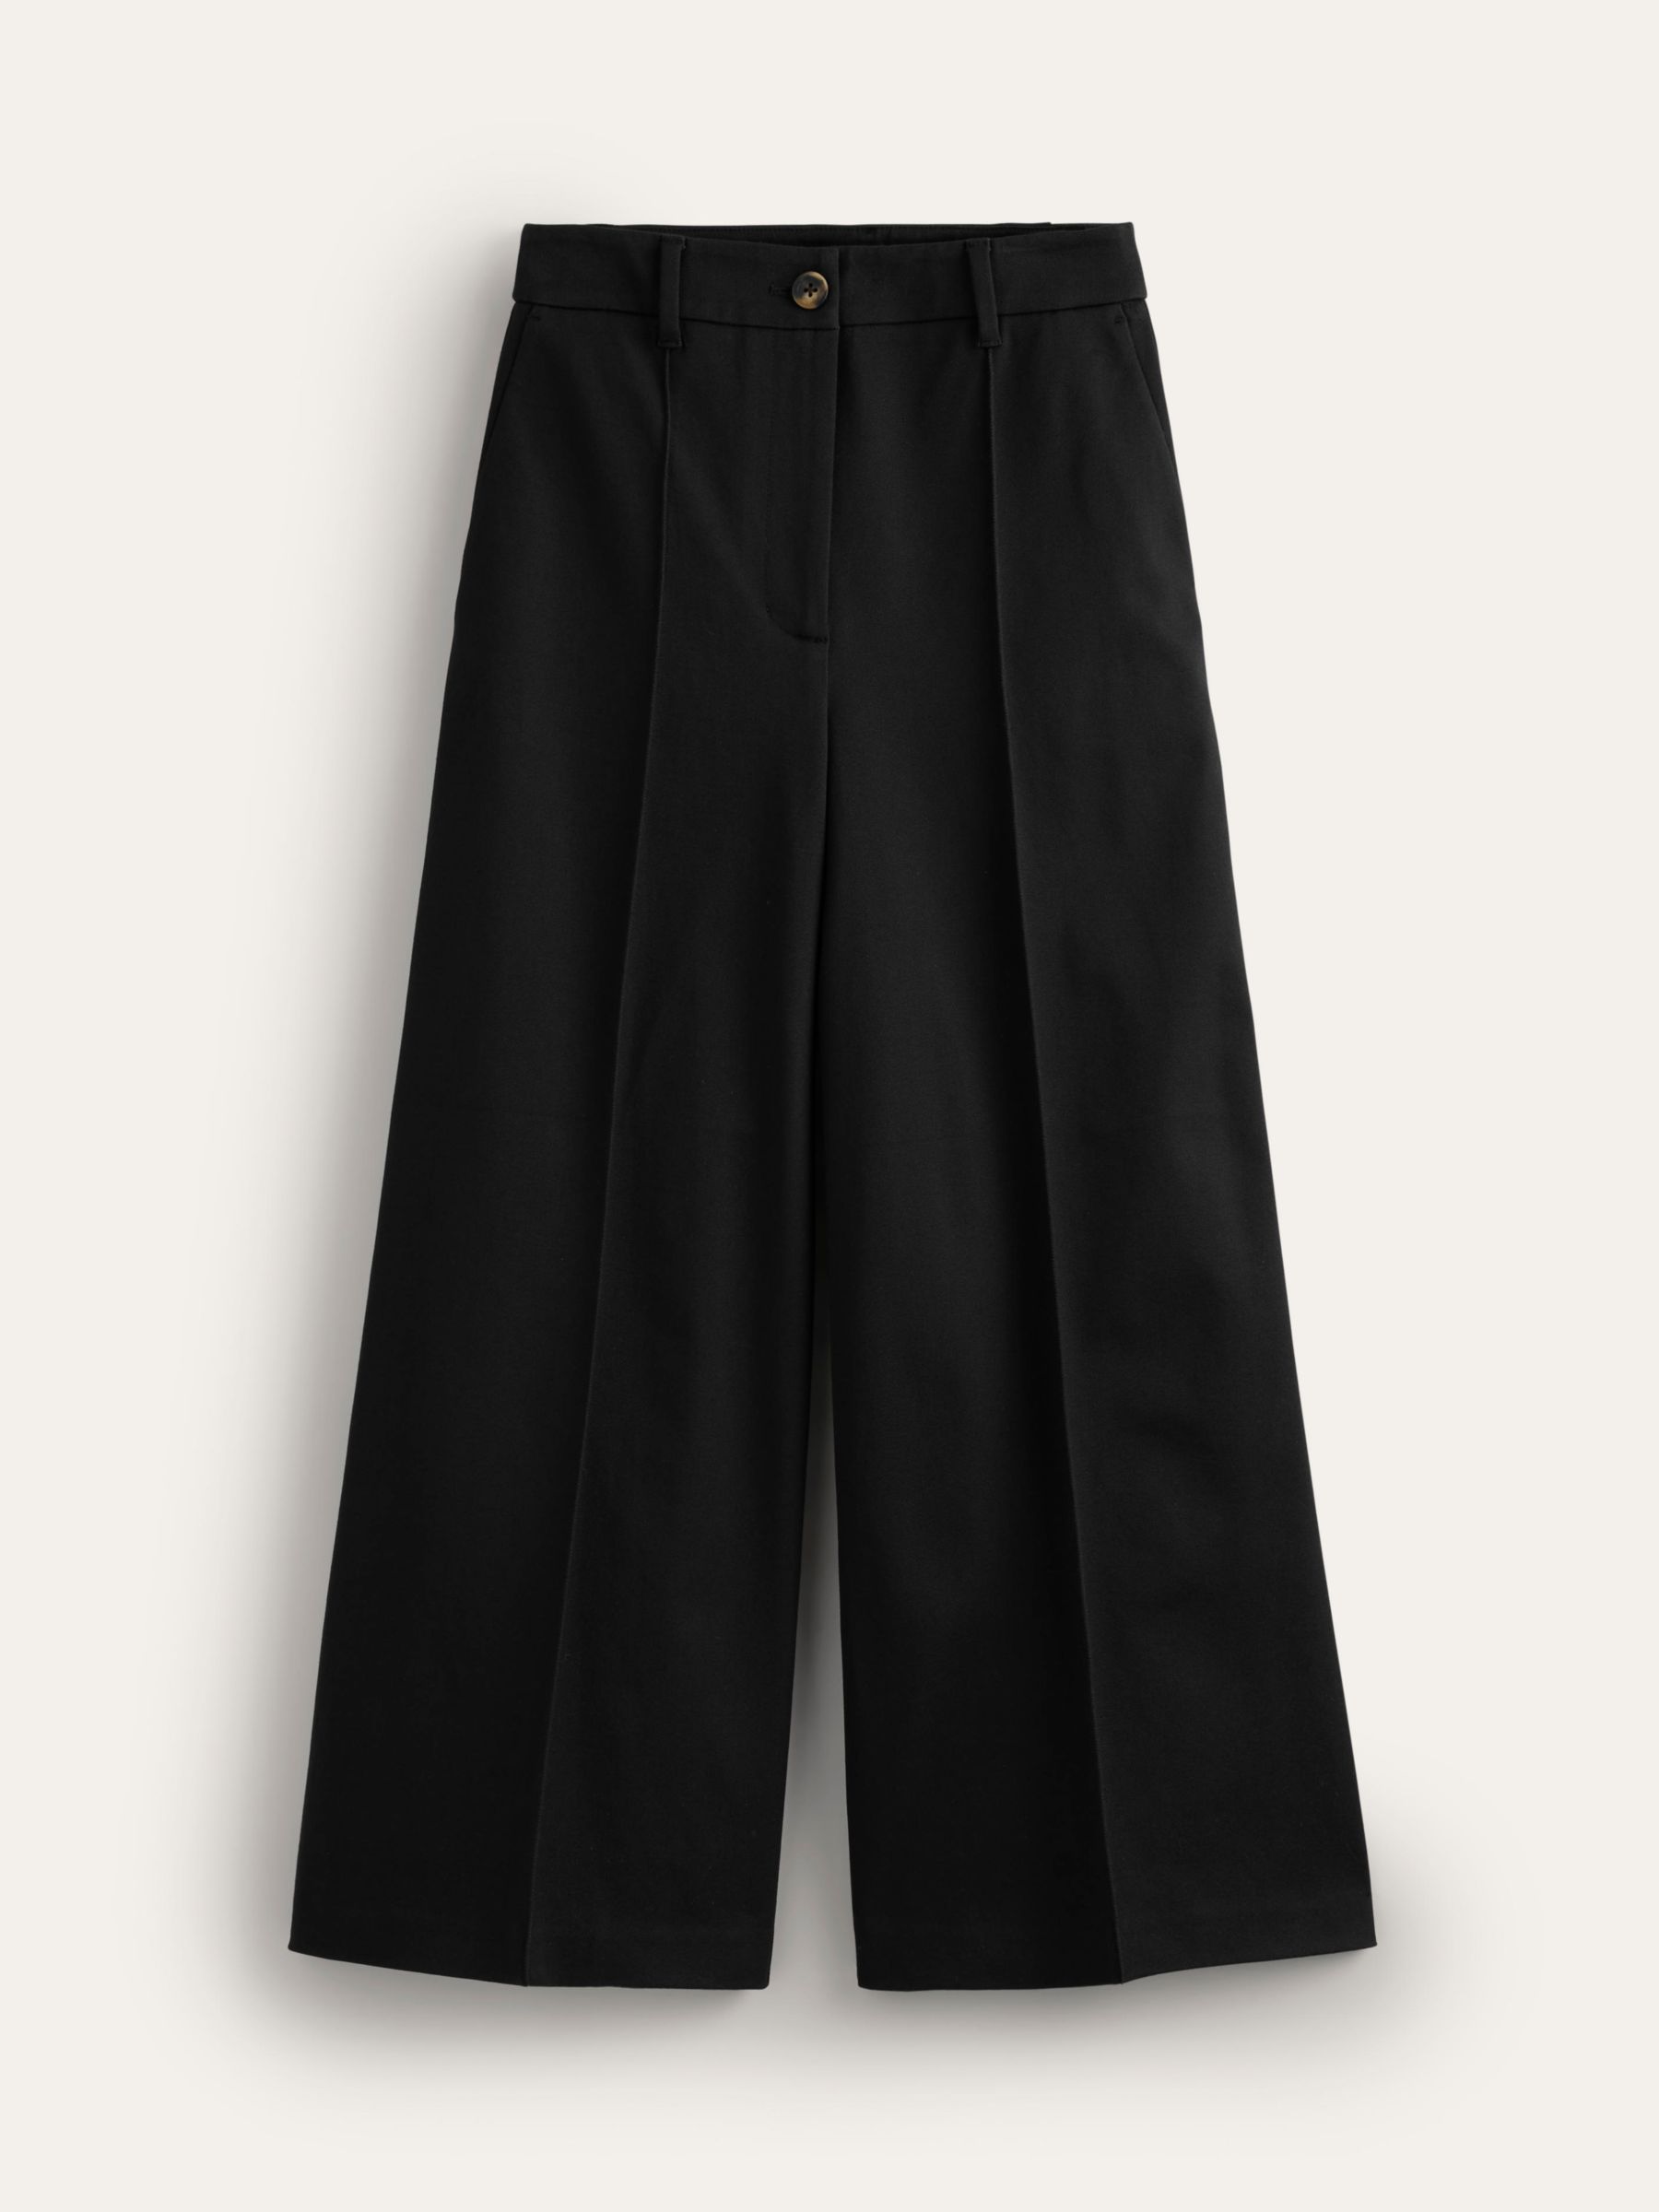 Boden Wide Leg Cropped Trousers, Black at John Lewis & Partners